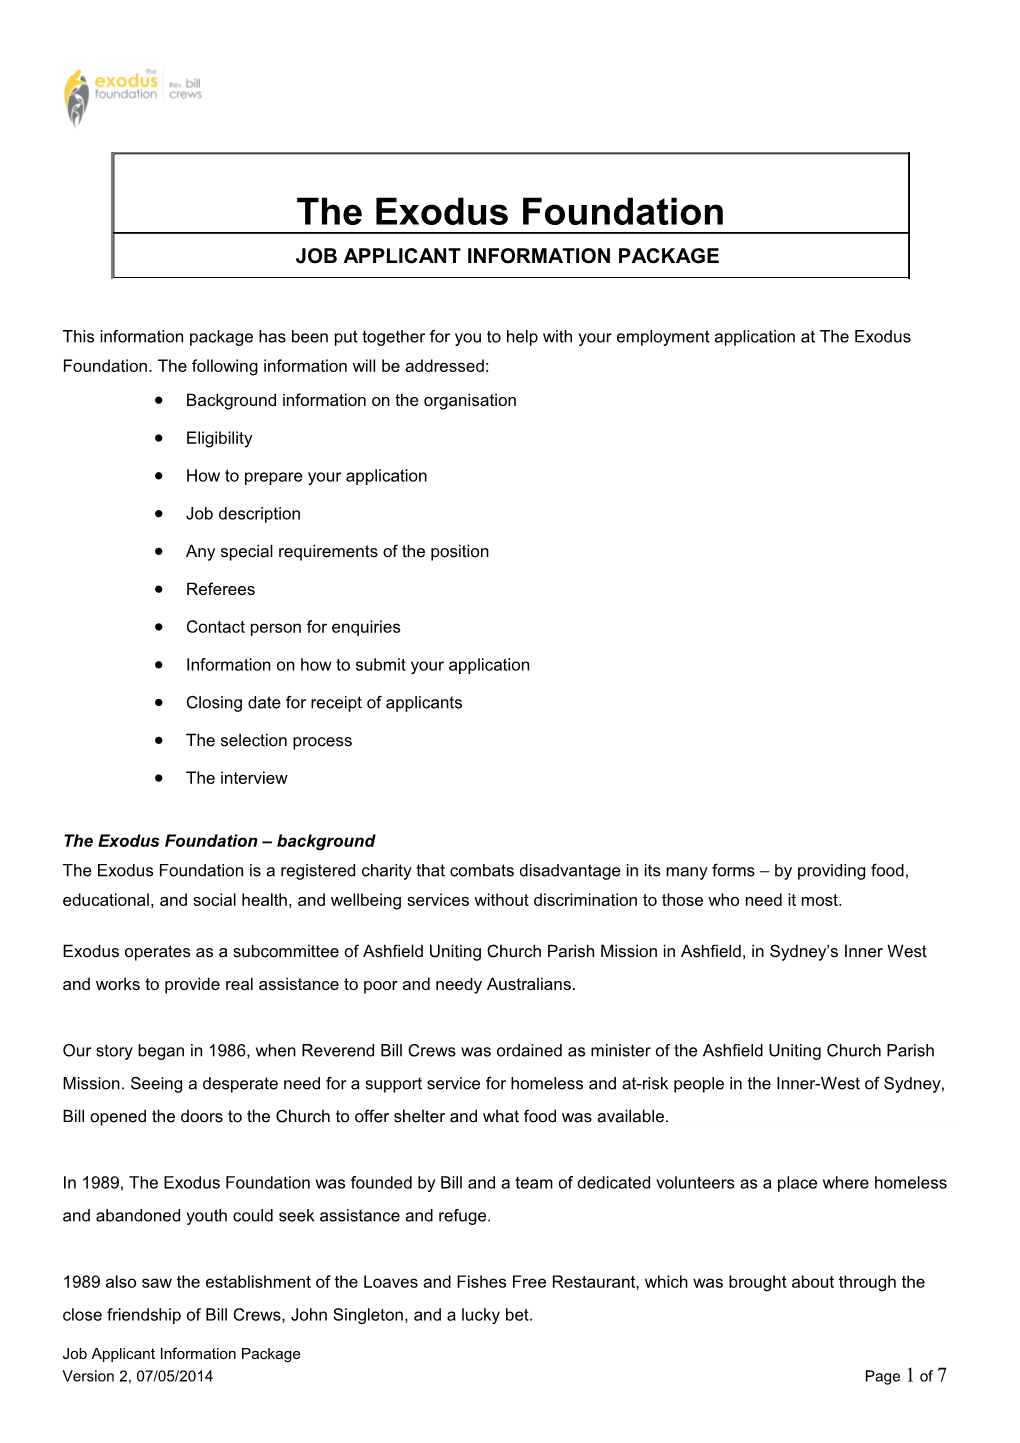 This Information Package Has Been Put Together for You to Help with Your Employment Application